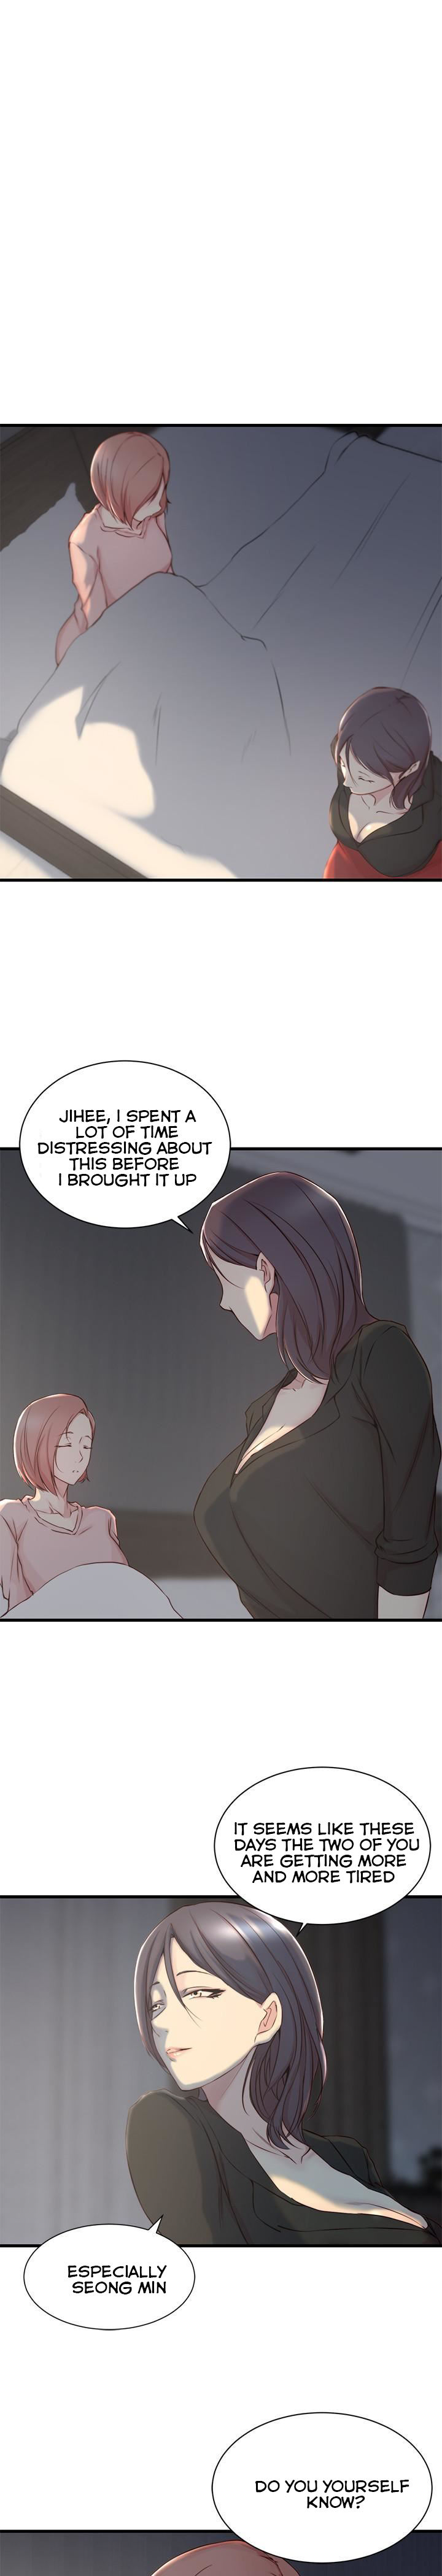 Sister In Law (Kim Jol Gu) - Chapter 5 Page 4